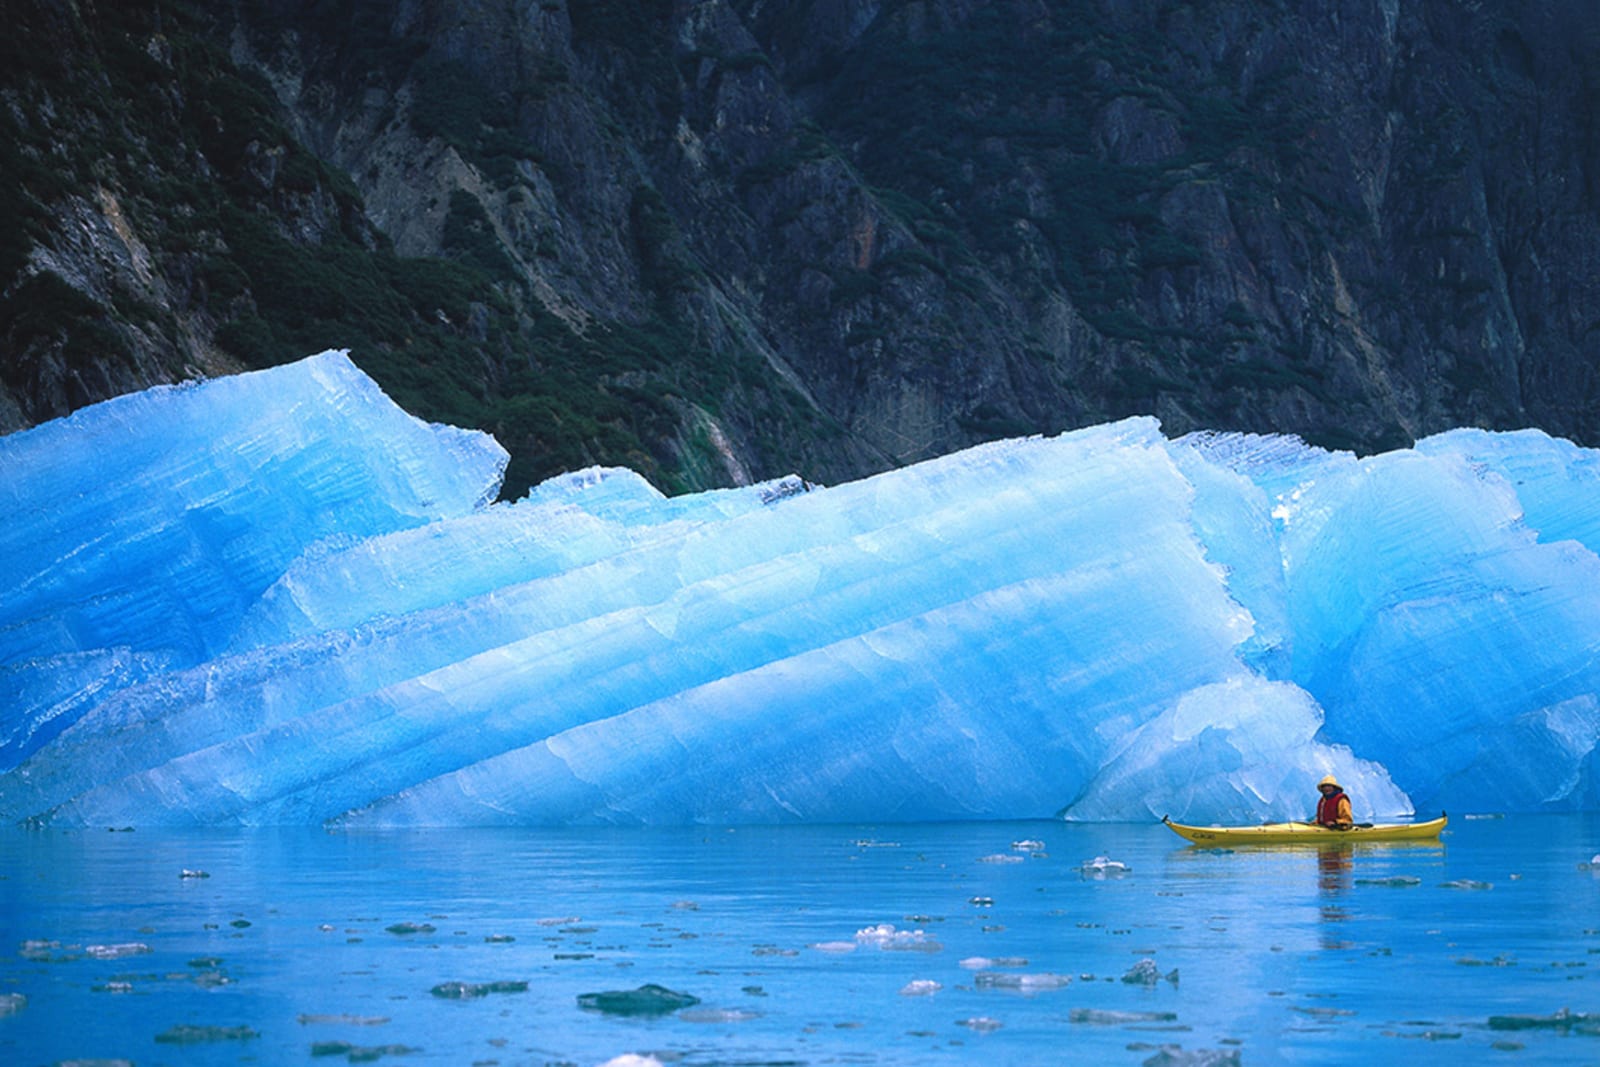 Glacier kayaking adventures are among the best Alaska cruise excursions